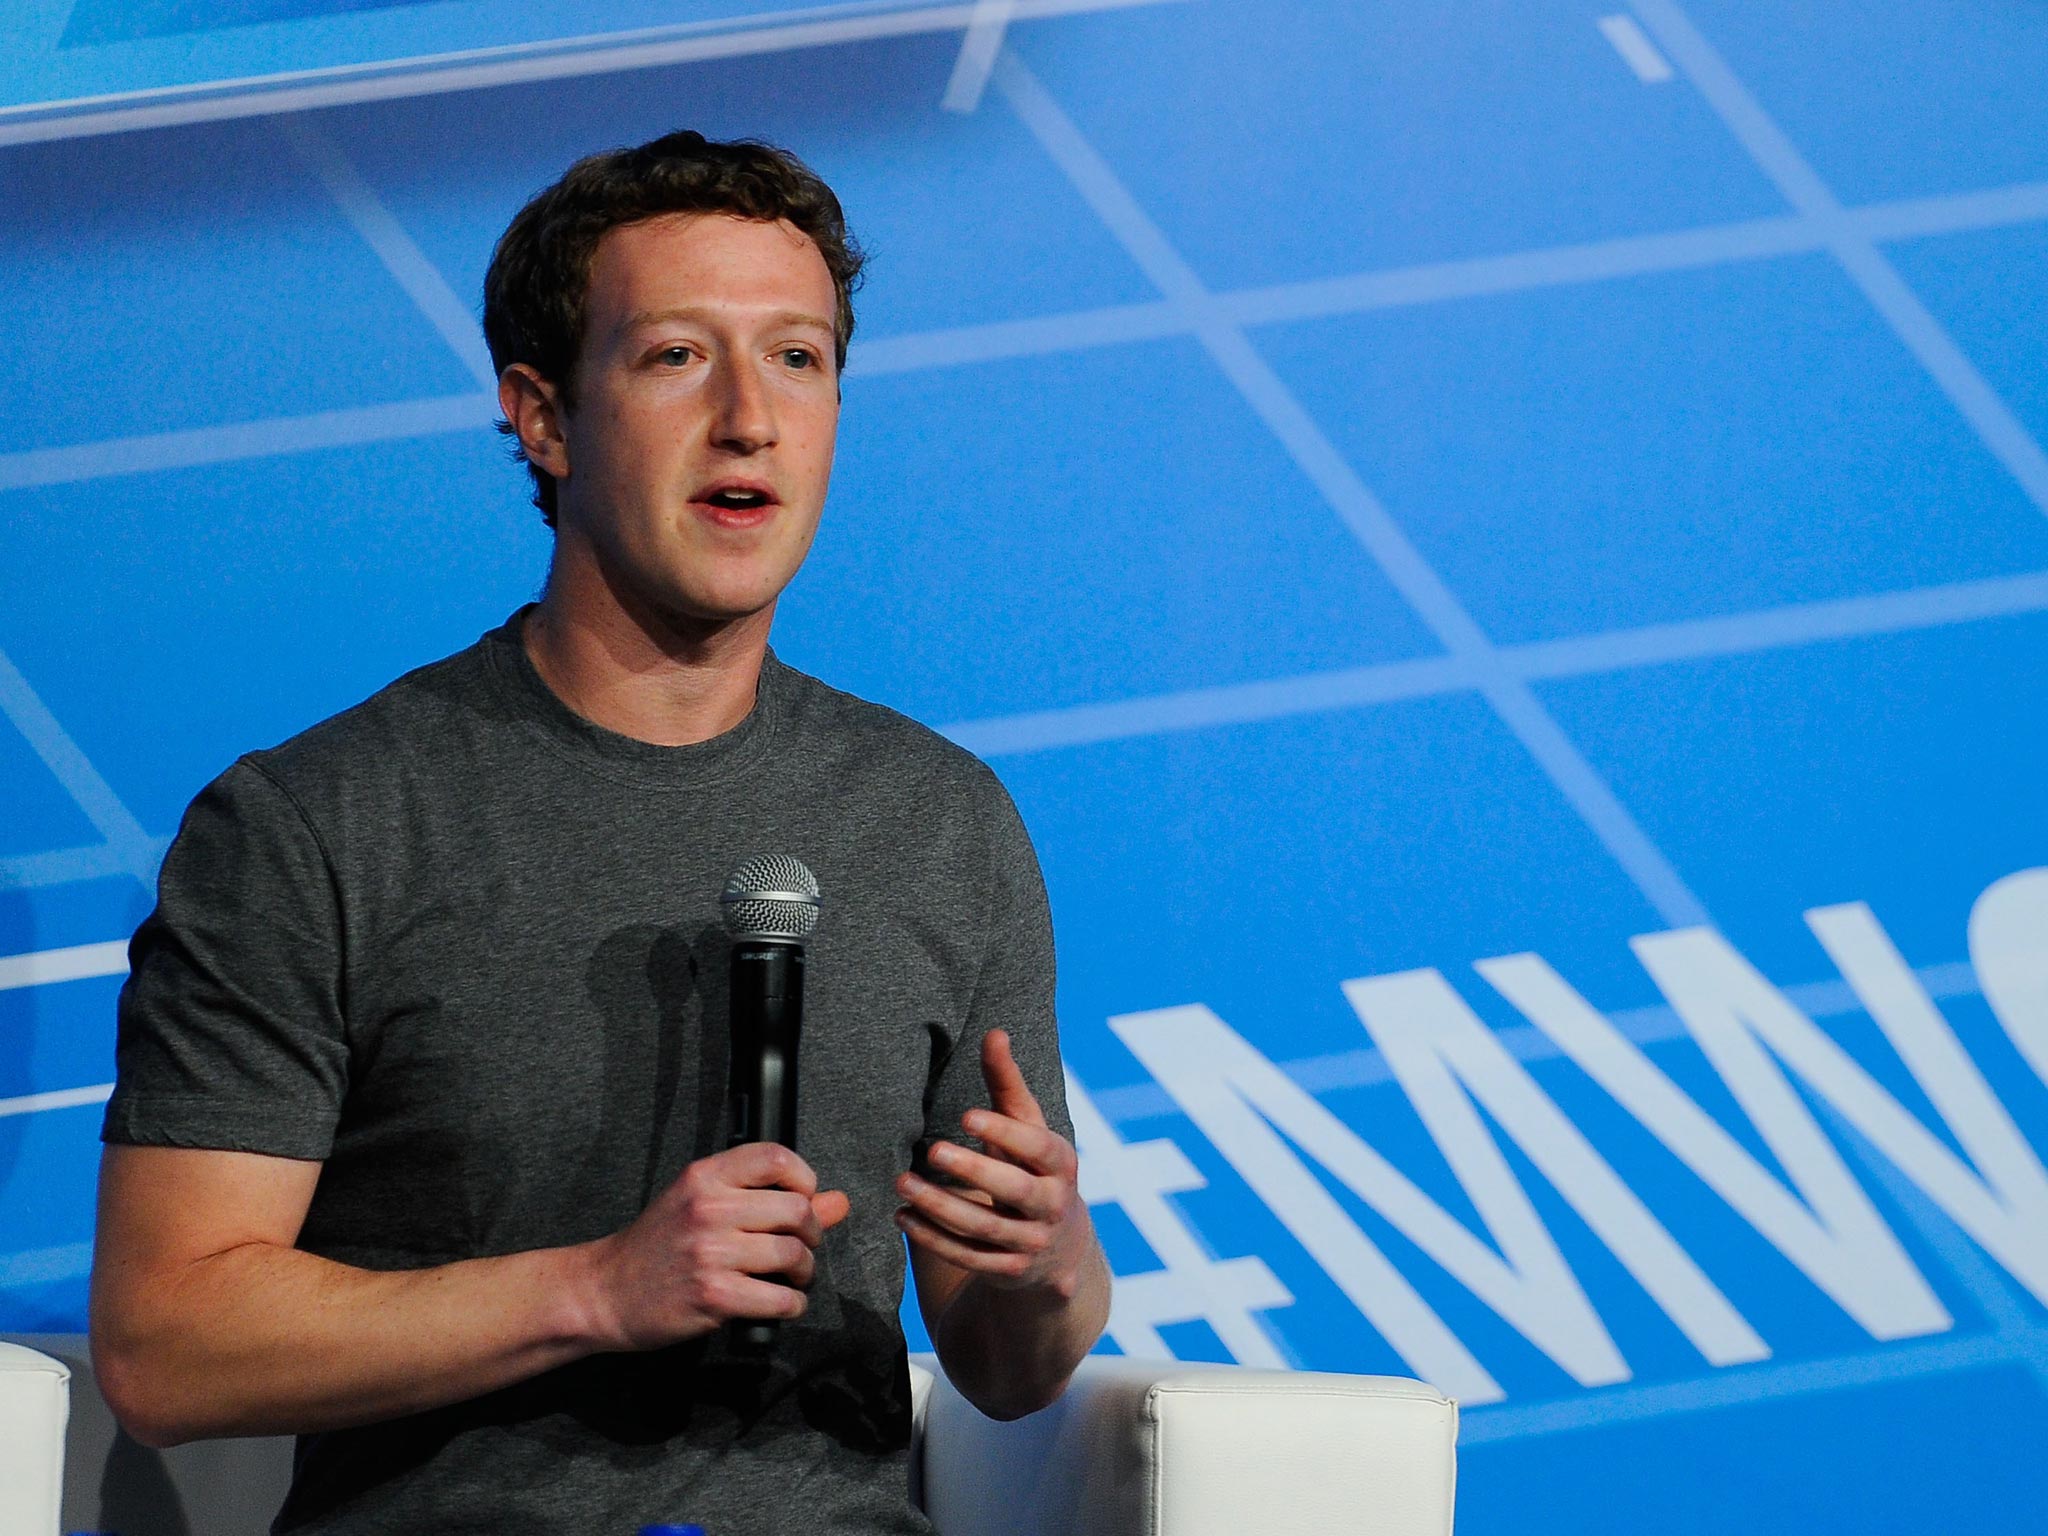 Co-Founder, Chairman and CEO of Facebook Mark Zuckerberg  speaks during his keynote conference at the Mobile World Congress 2014 